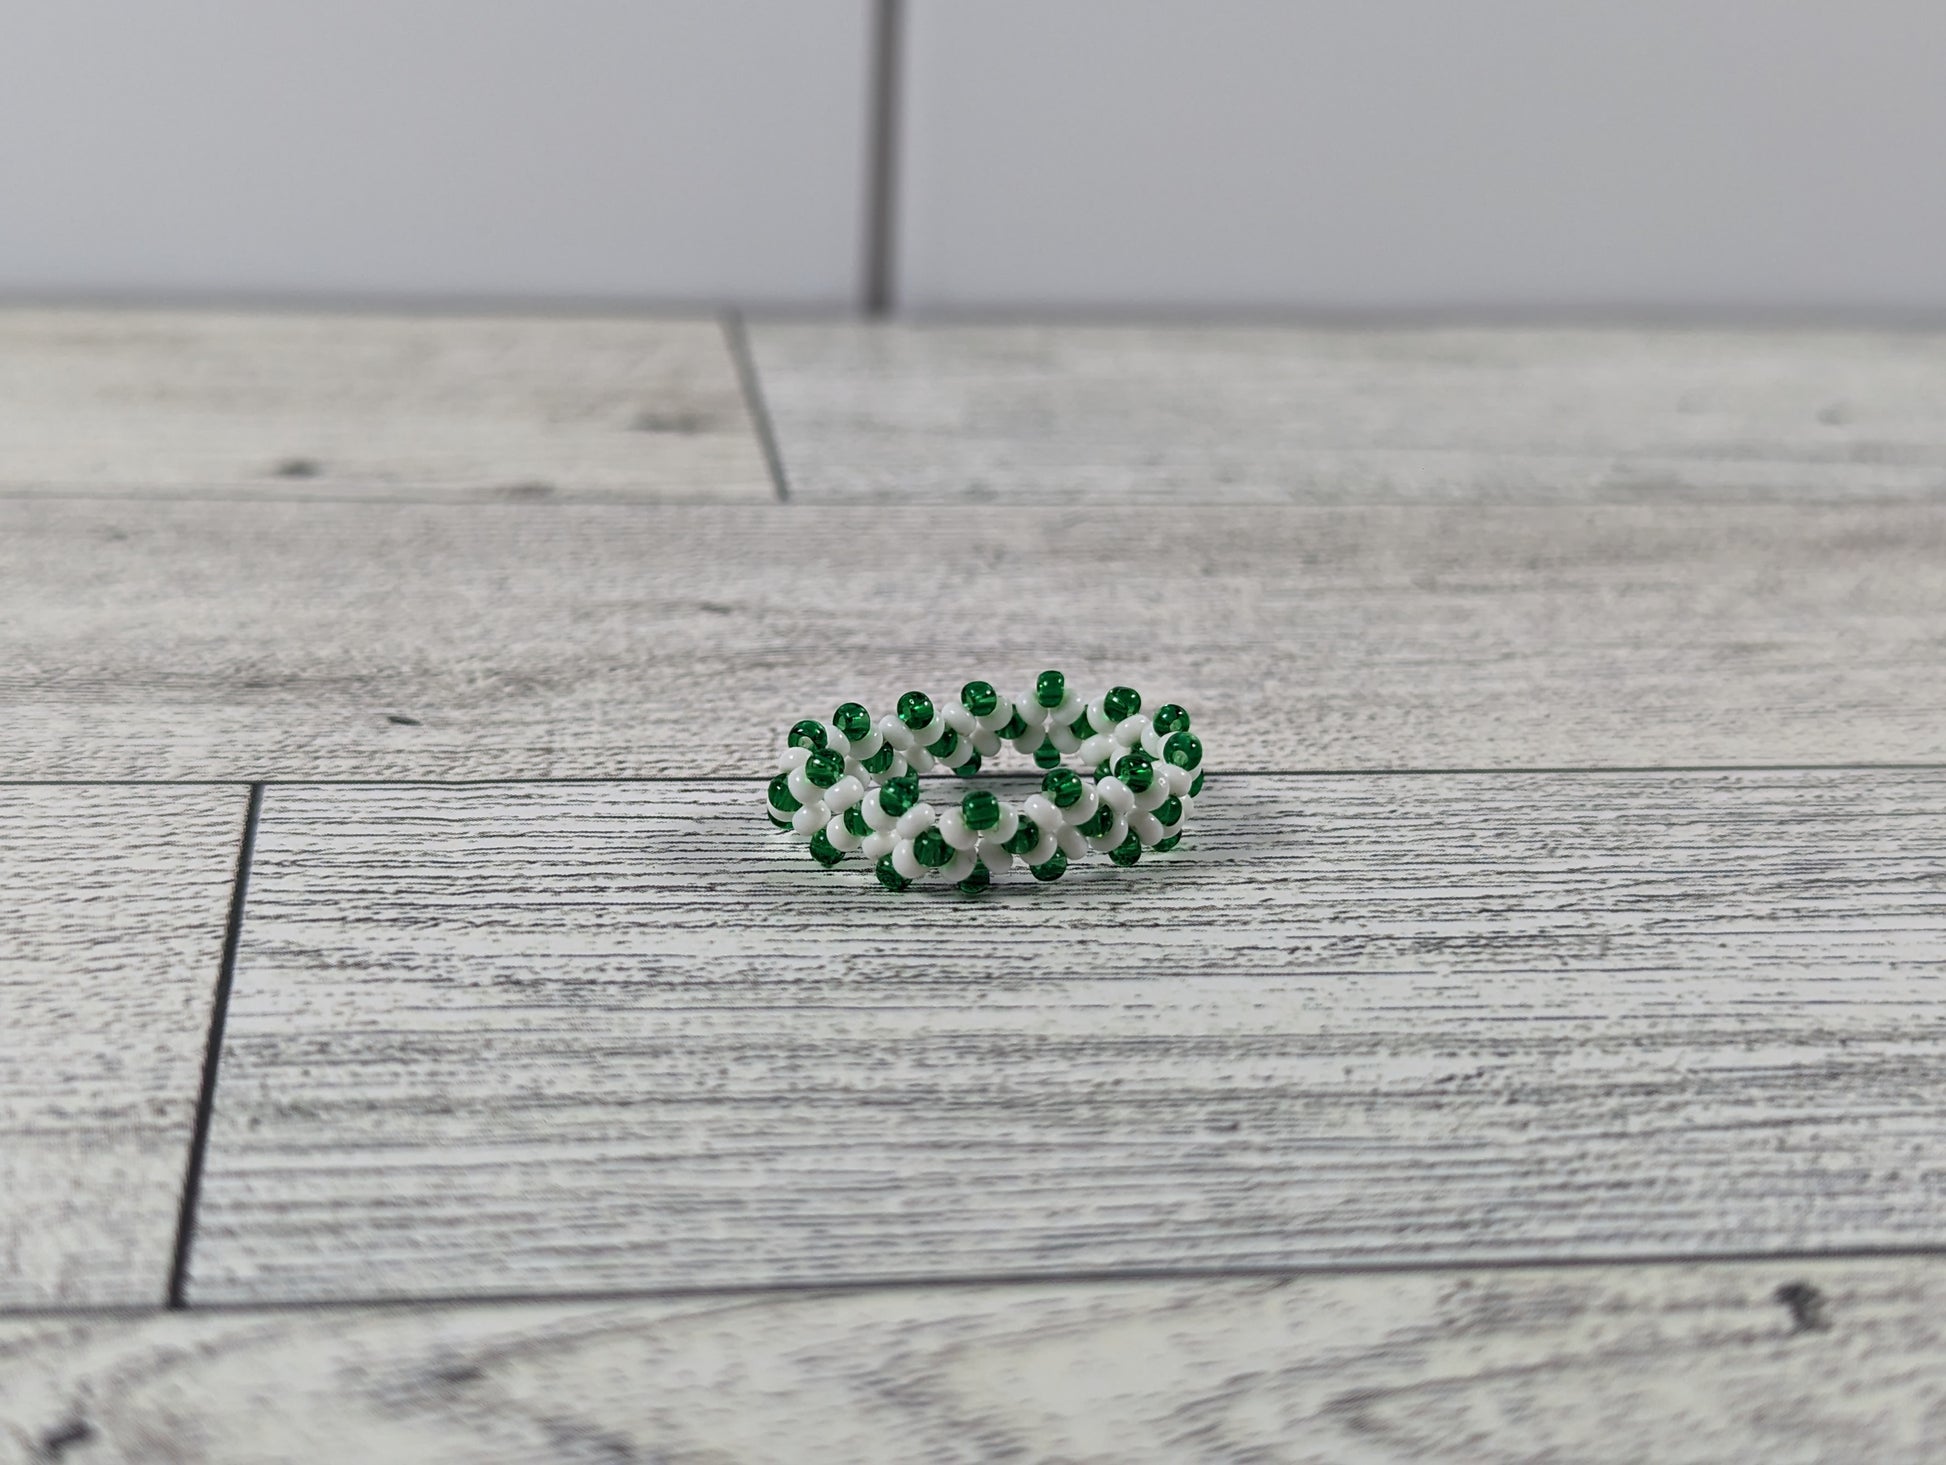 A green and white ring placed on a wood grain surface with a tile backdrop.